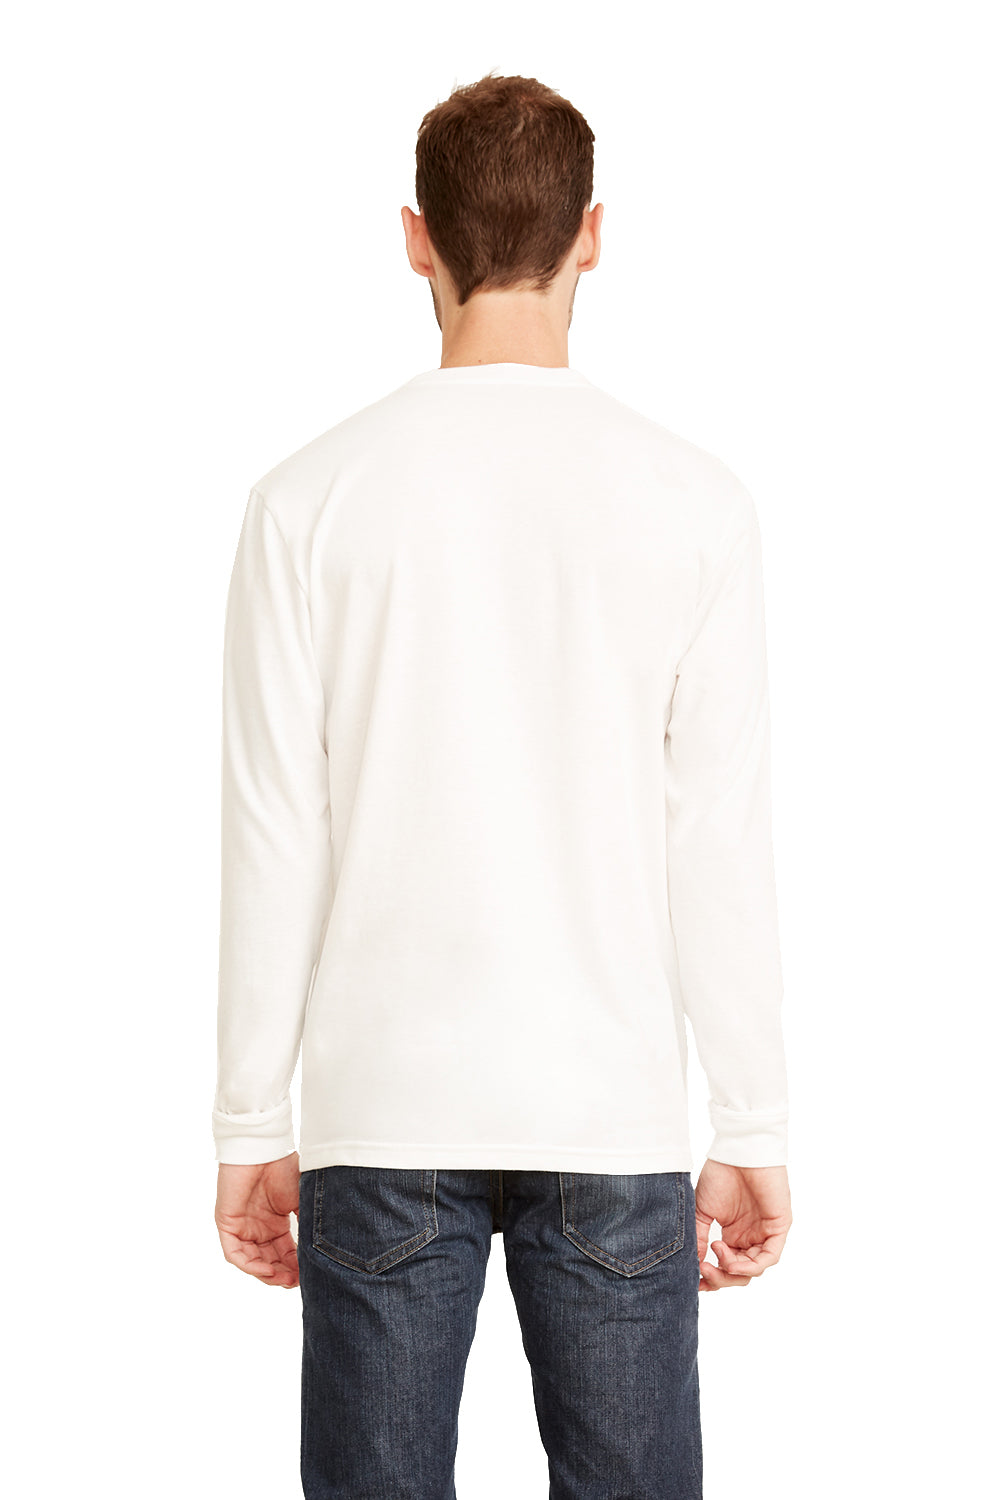 Next Level 6411 Mens Sueded Jersey Long Sleeve Crewneck T-Shirt White Back